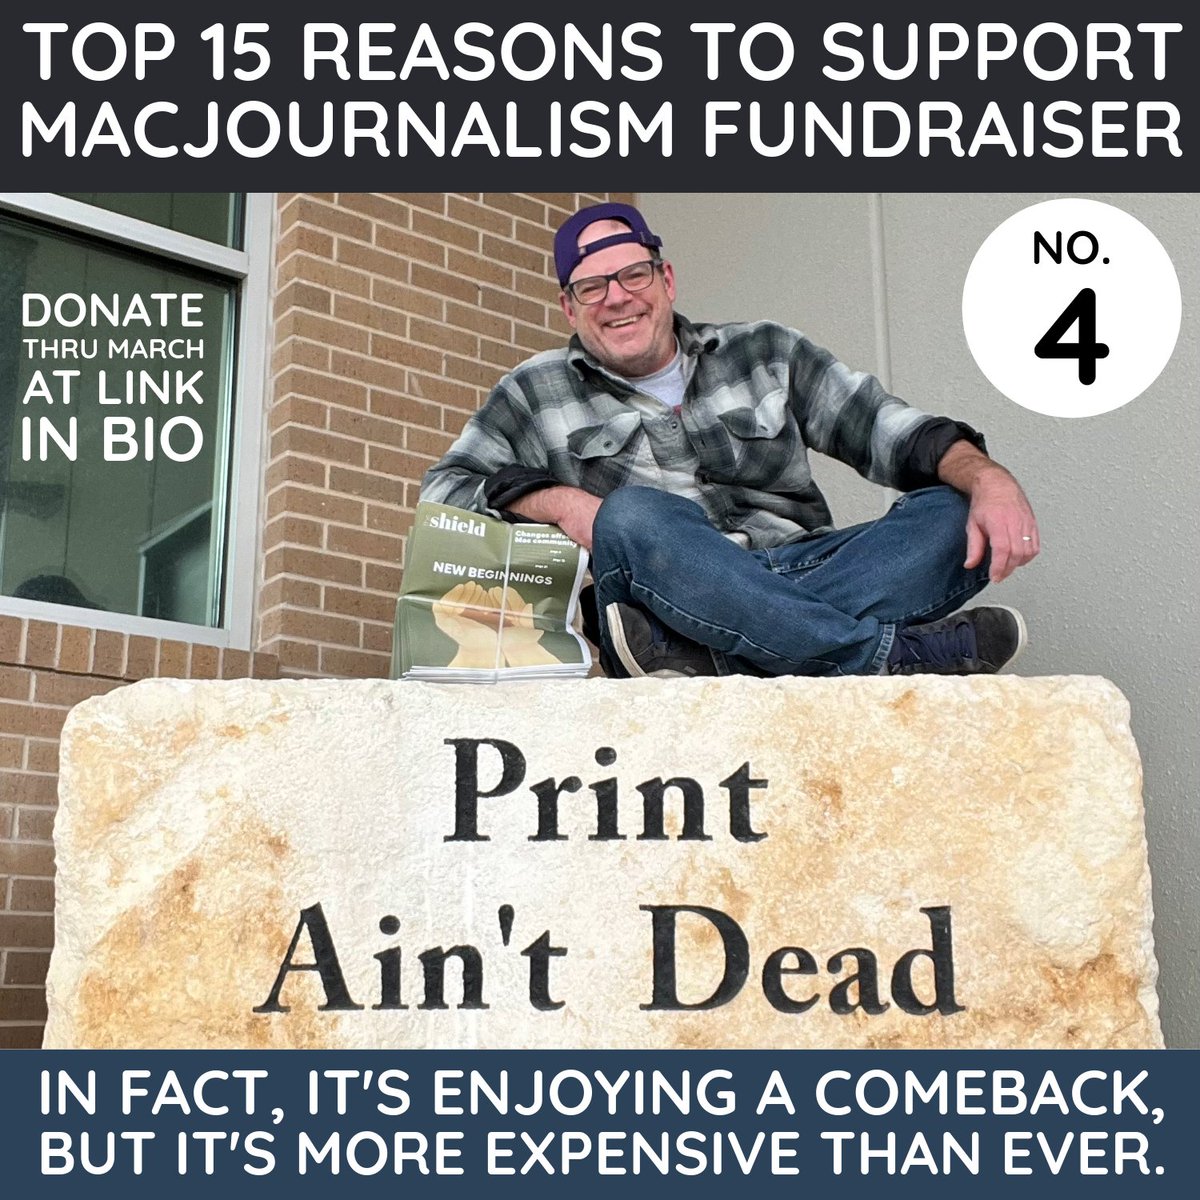 TOP 15 REASONS TO SUPPORT THE MACJ FUNDRAISER: No. 4—Print is not dead. In fact, it's making a comeback, but it's more expensive than ever. Help us continue to bring you the Shield like we always have … without interruption since 1953. @impactnews give.livingtree.com/c/support-macj…